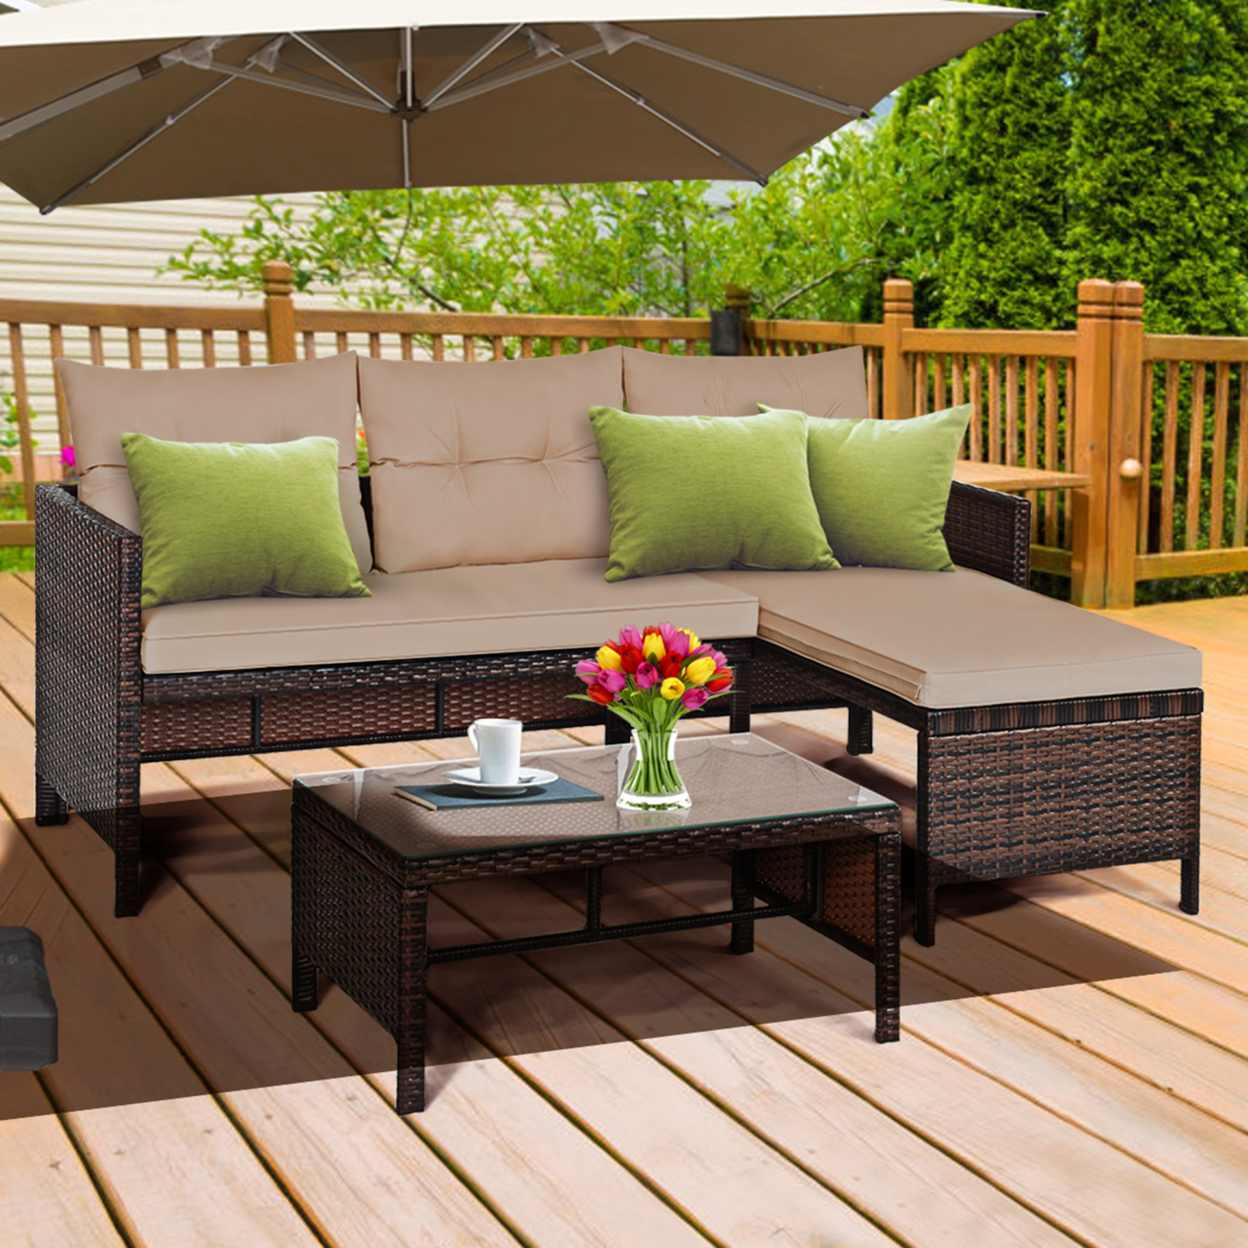 3PCS Outdoor Rattan Furniture Set Patio Couch Sofa Set W/ Coffee Table